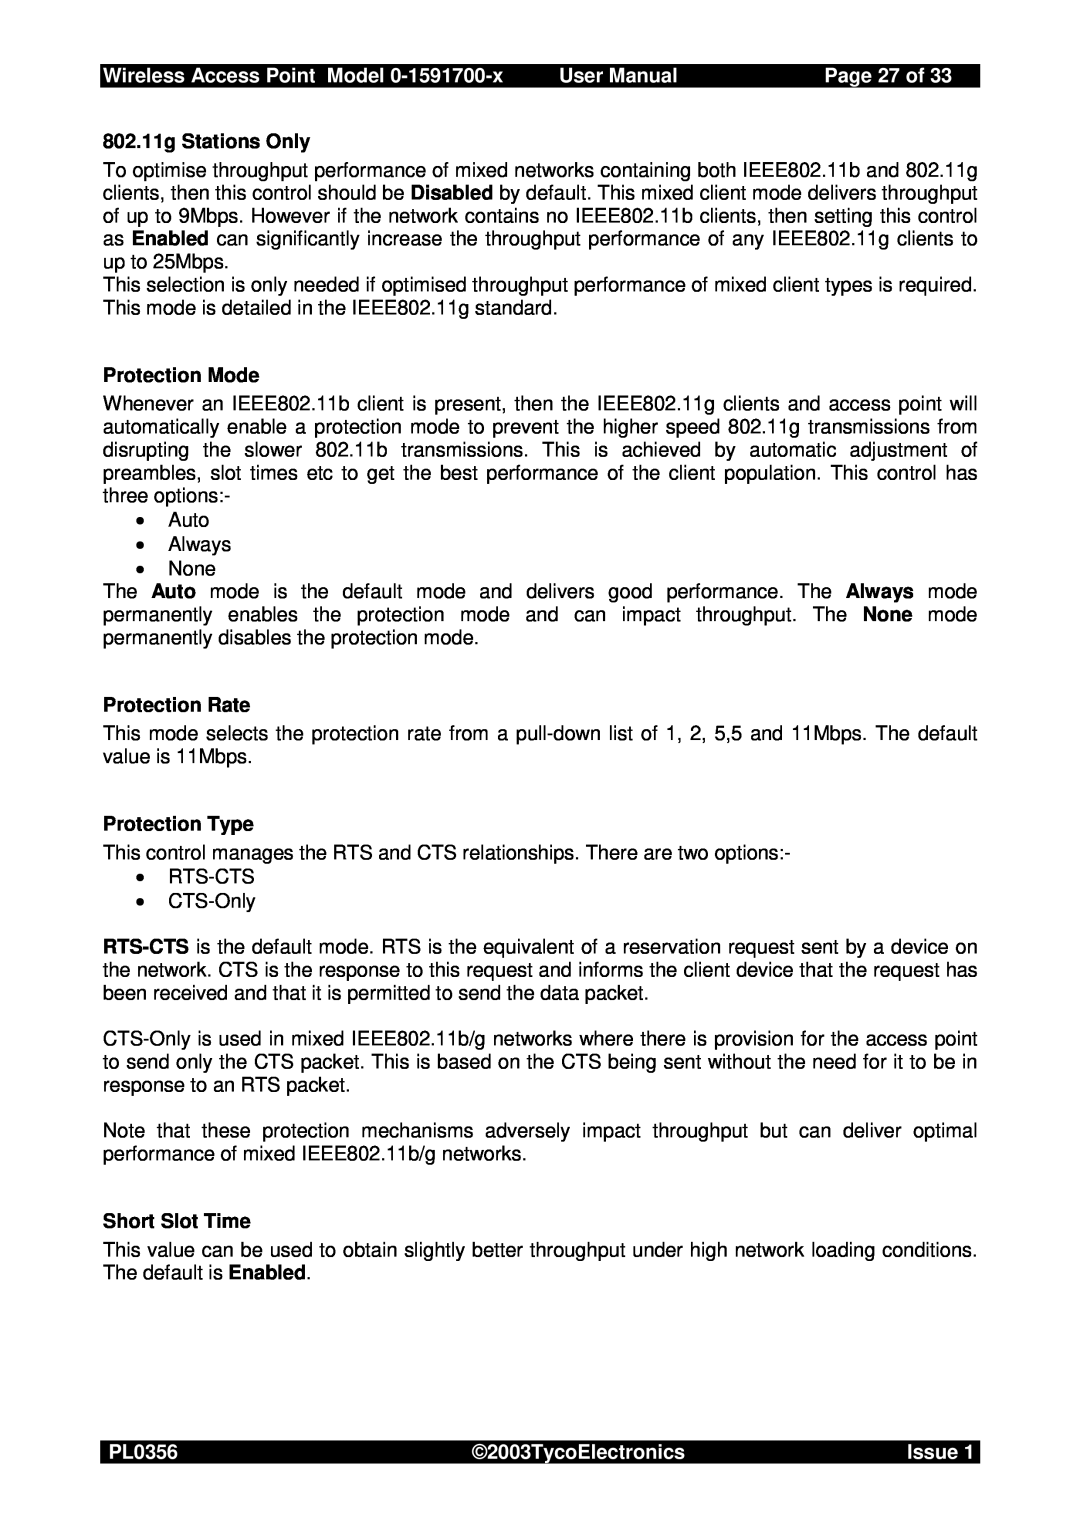 Tyco 0-1591700-x user manual Page 27 of, Wireless Access Point Model, User Manual, PL0356, 2003TycoElectronics, Issue 